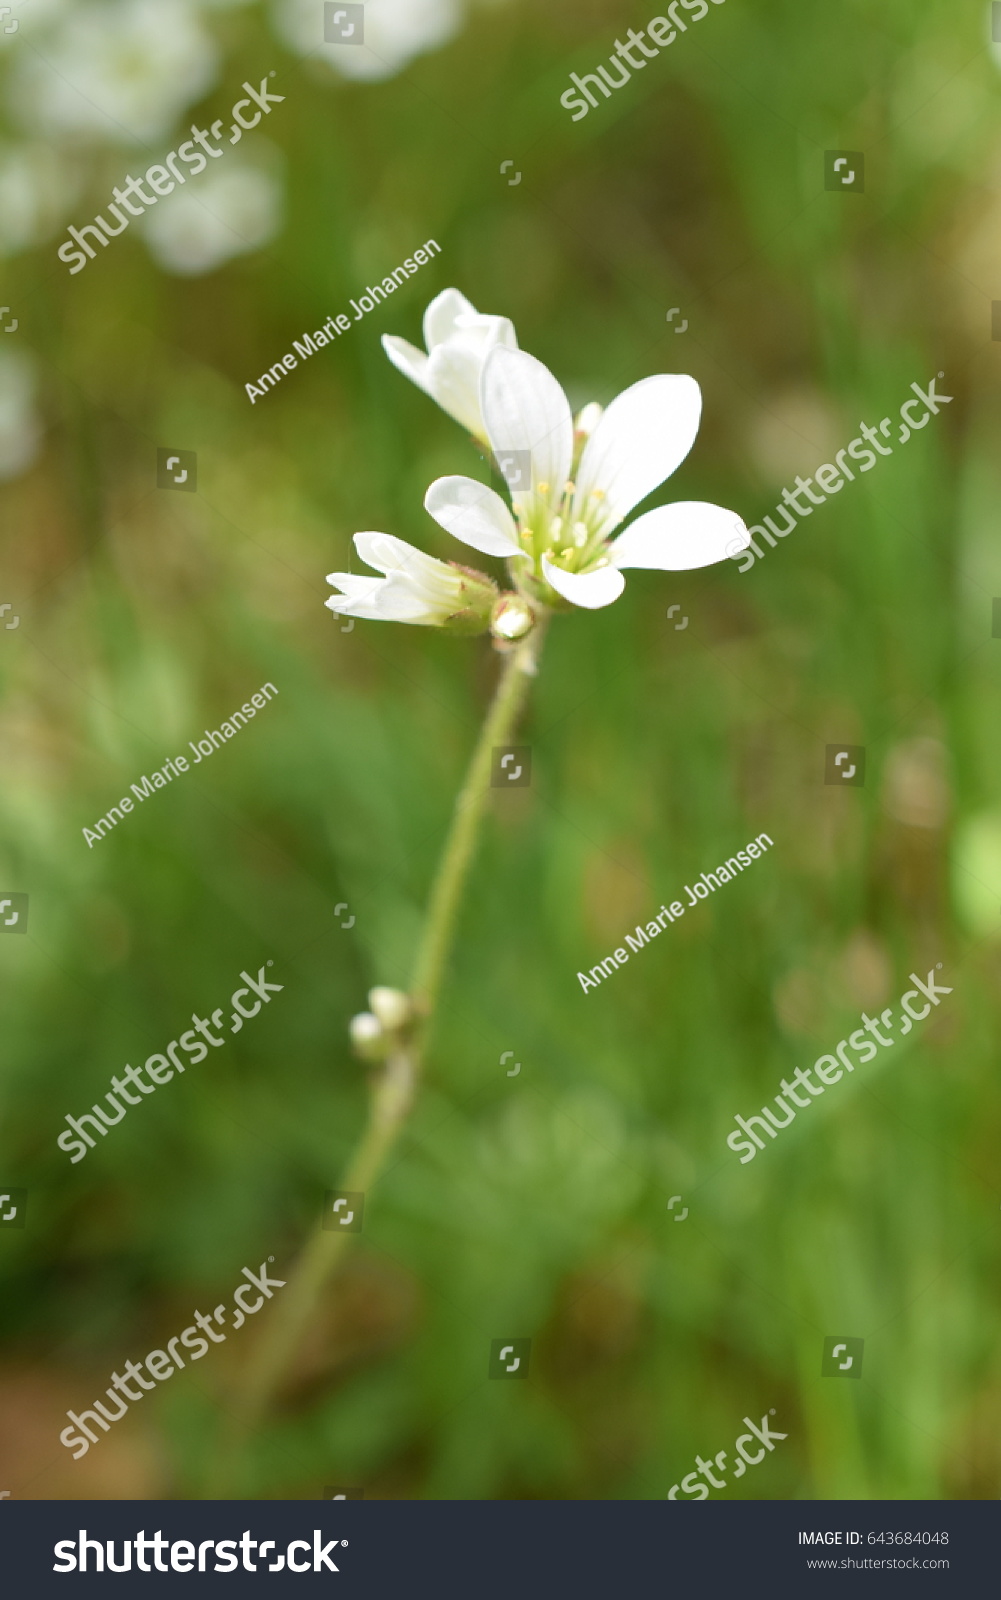 Dainty white flower growing in forest in the spring #643684048